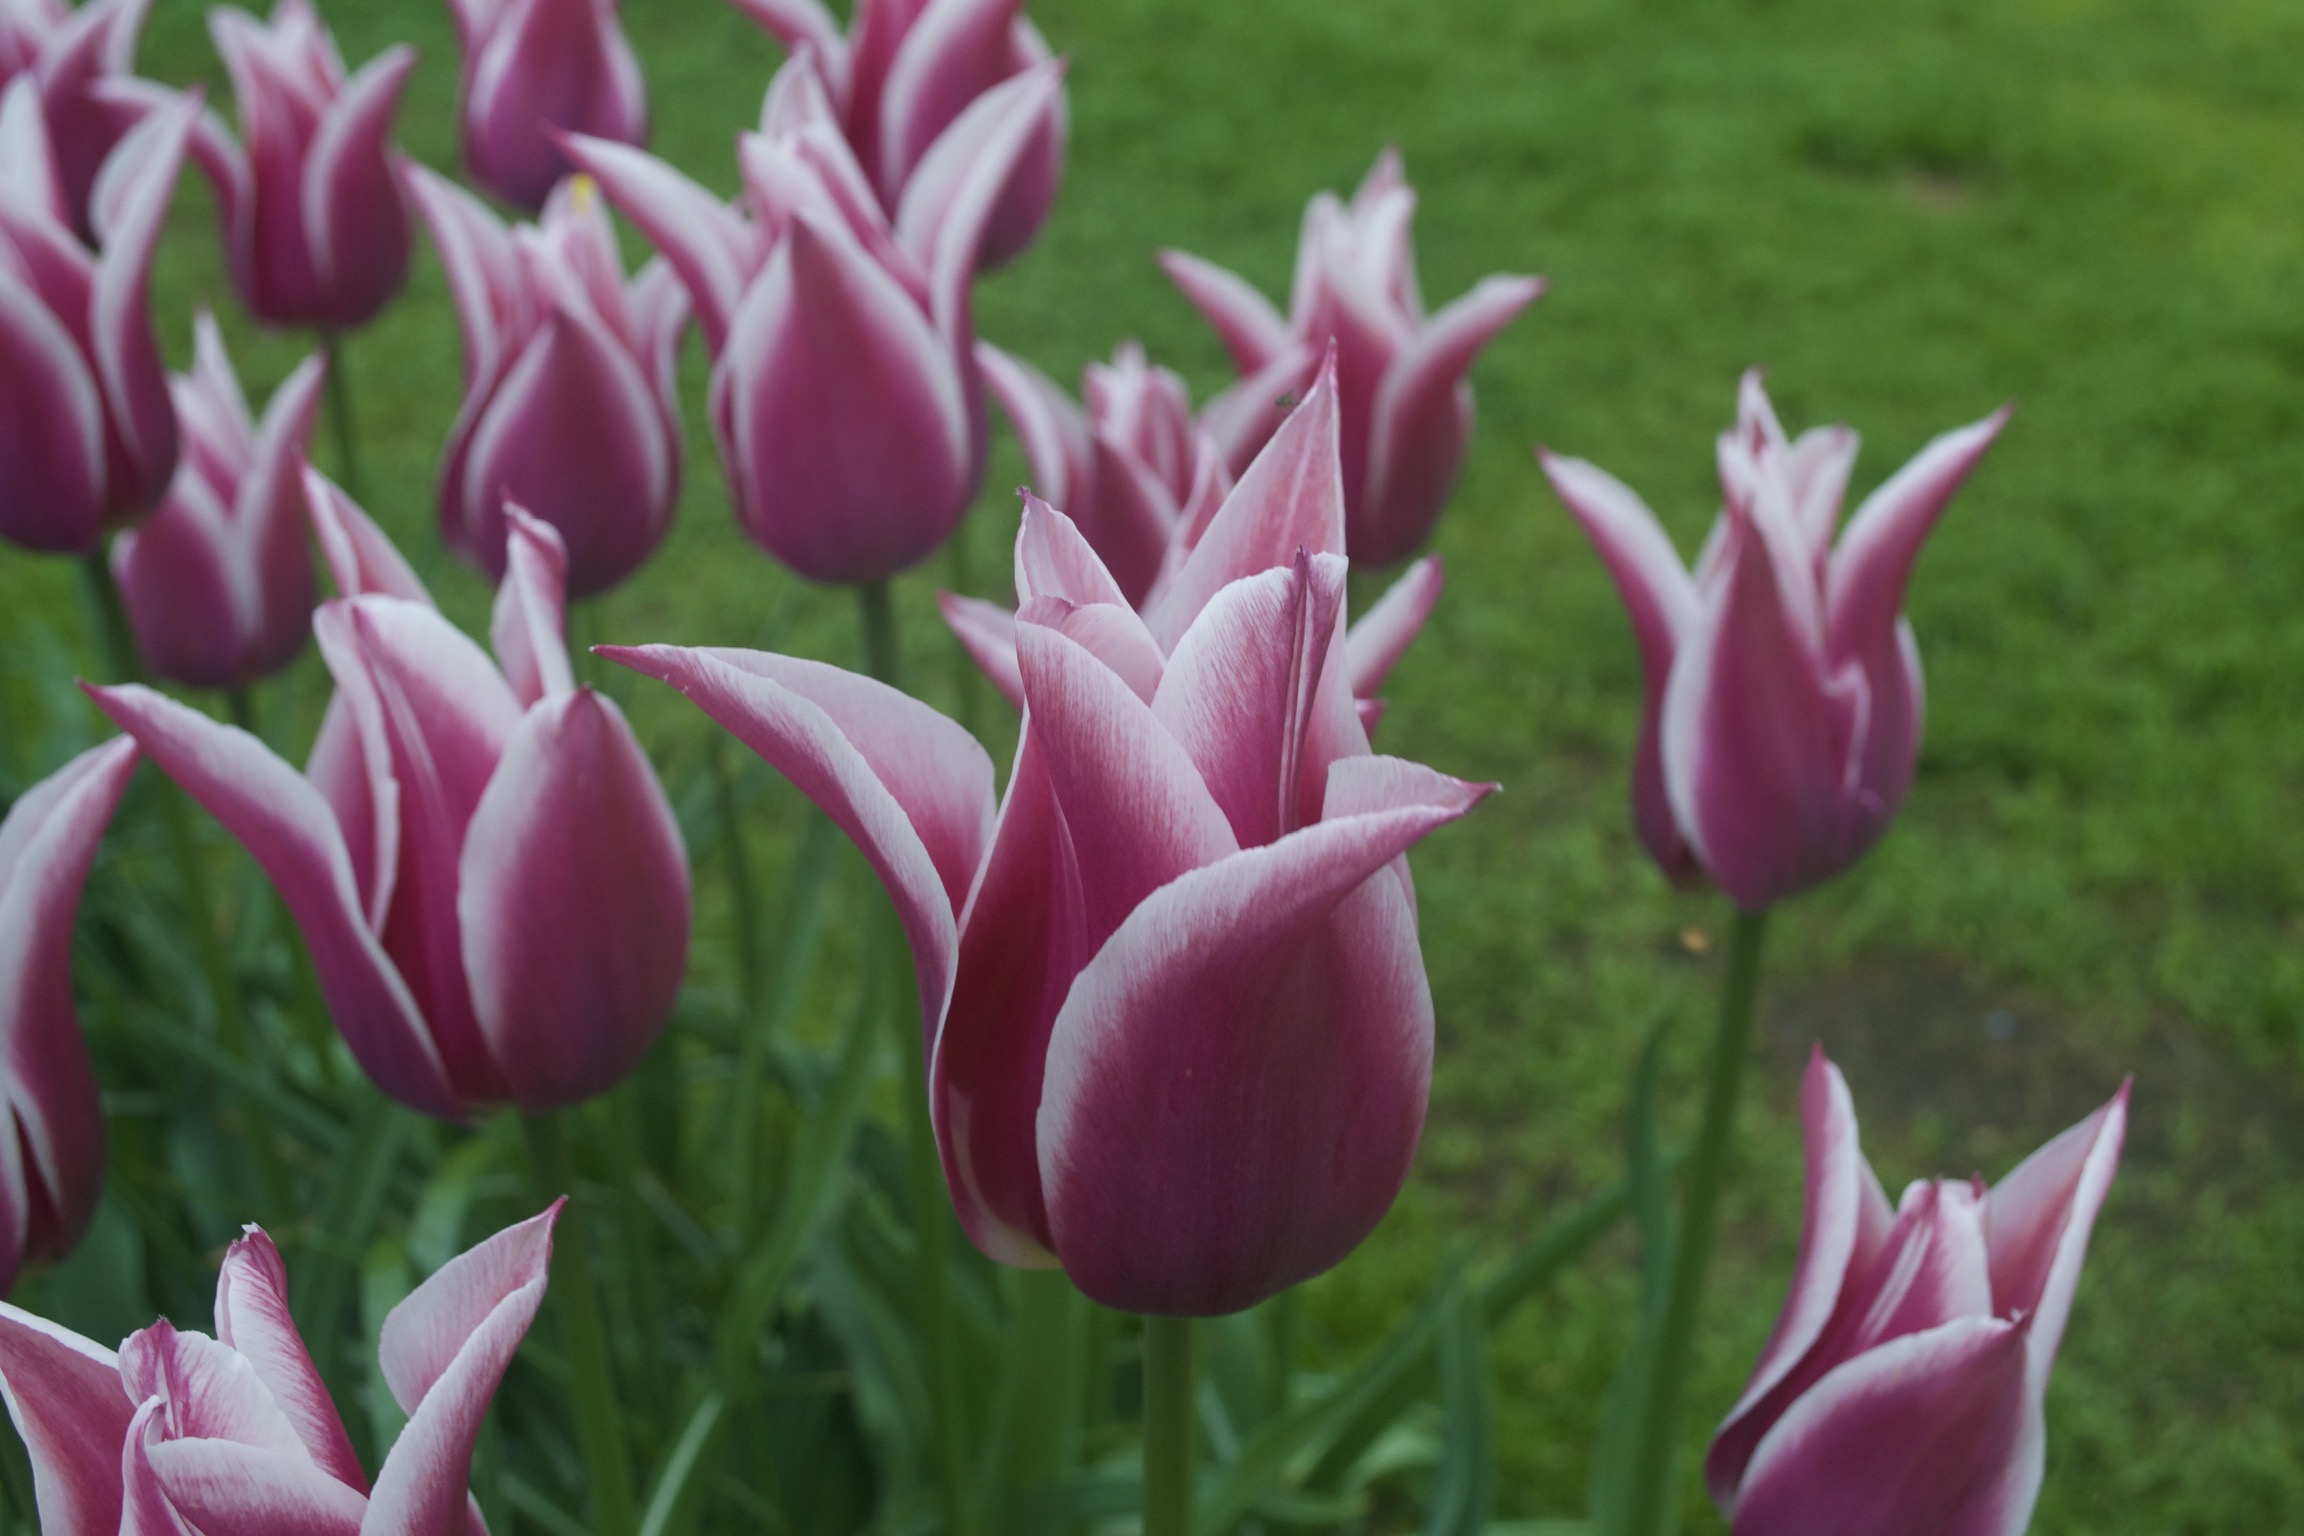 A closeup of a deep maroon tulip with white accents.